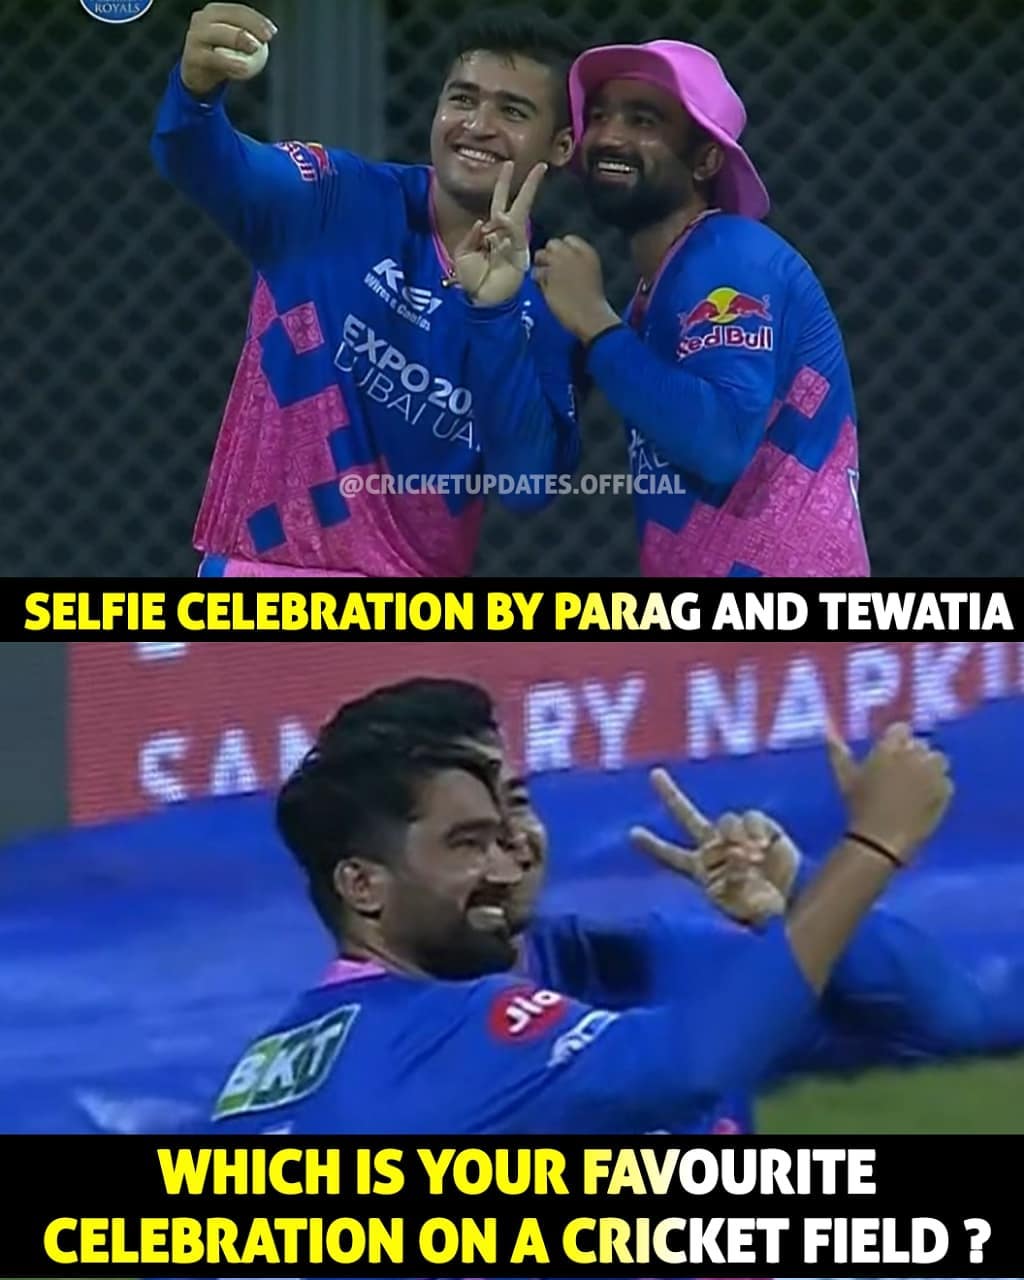 IPL 2021: Parag and Tewatia does the selfie celebration again as they dismissed Pat Cummins